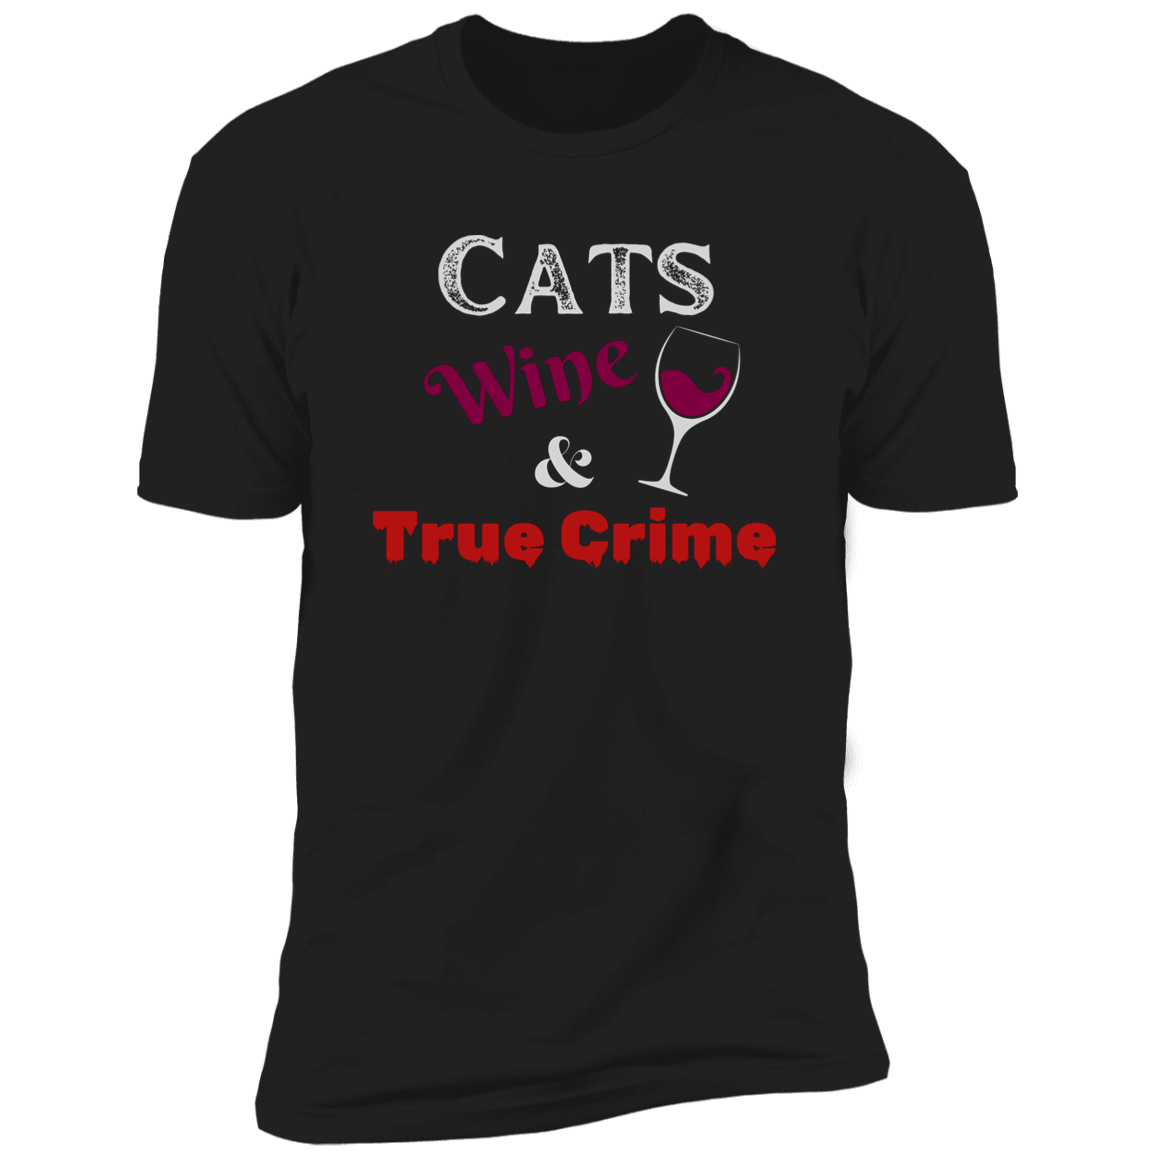 Cats Wine & True Crime T-shirt, Cat shirt for humans, funny cat shirt, in black 